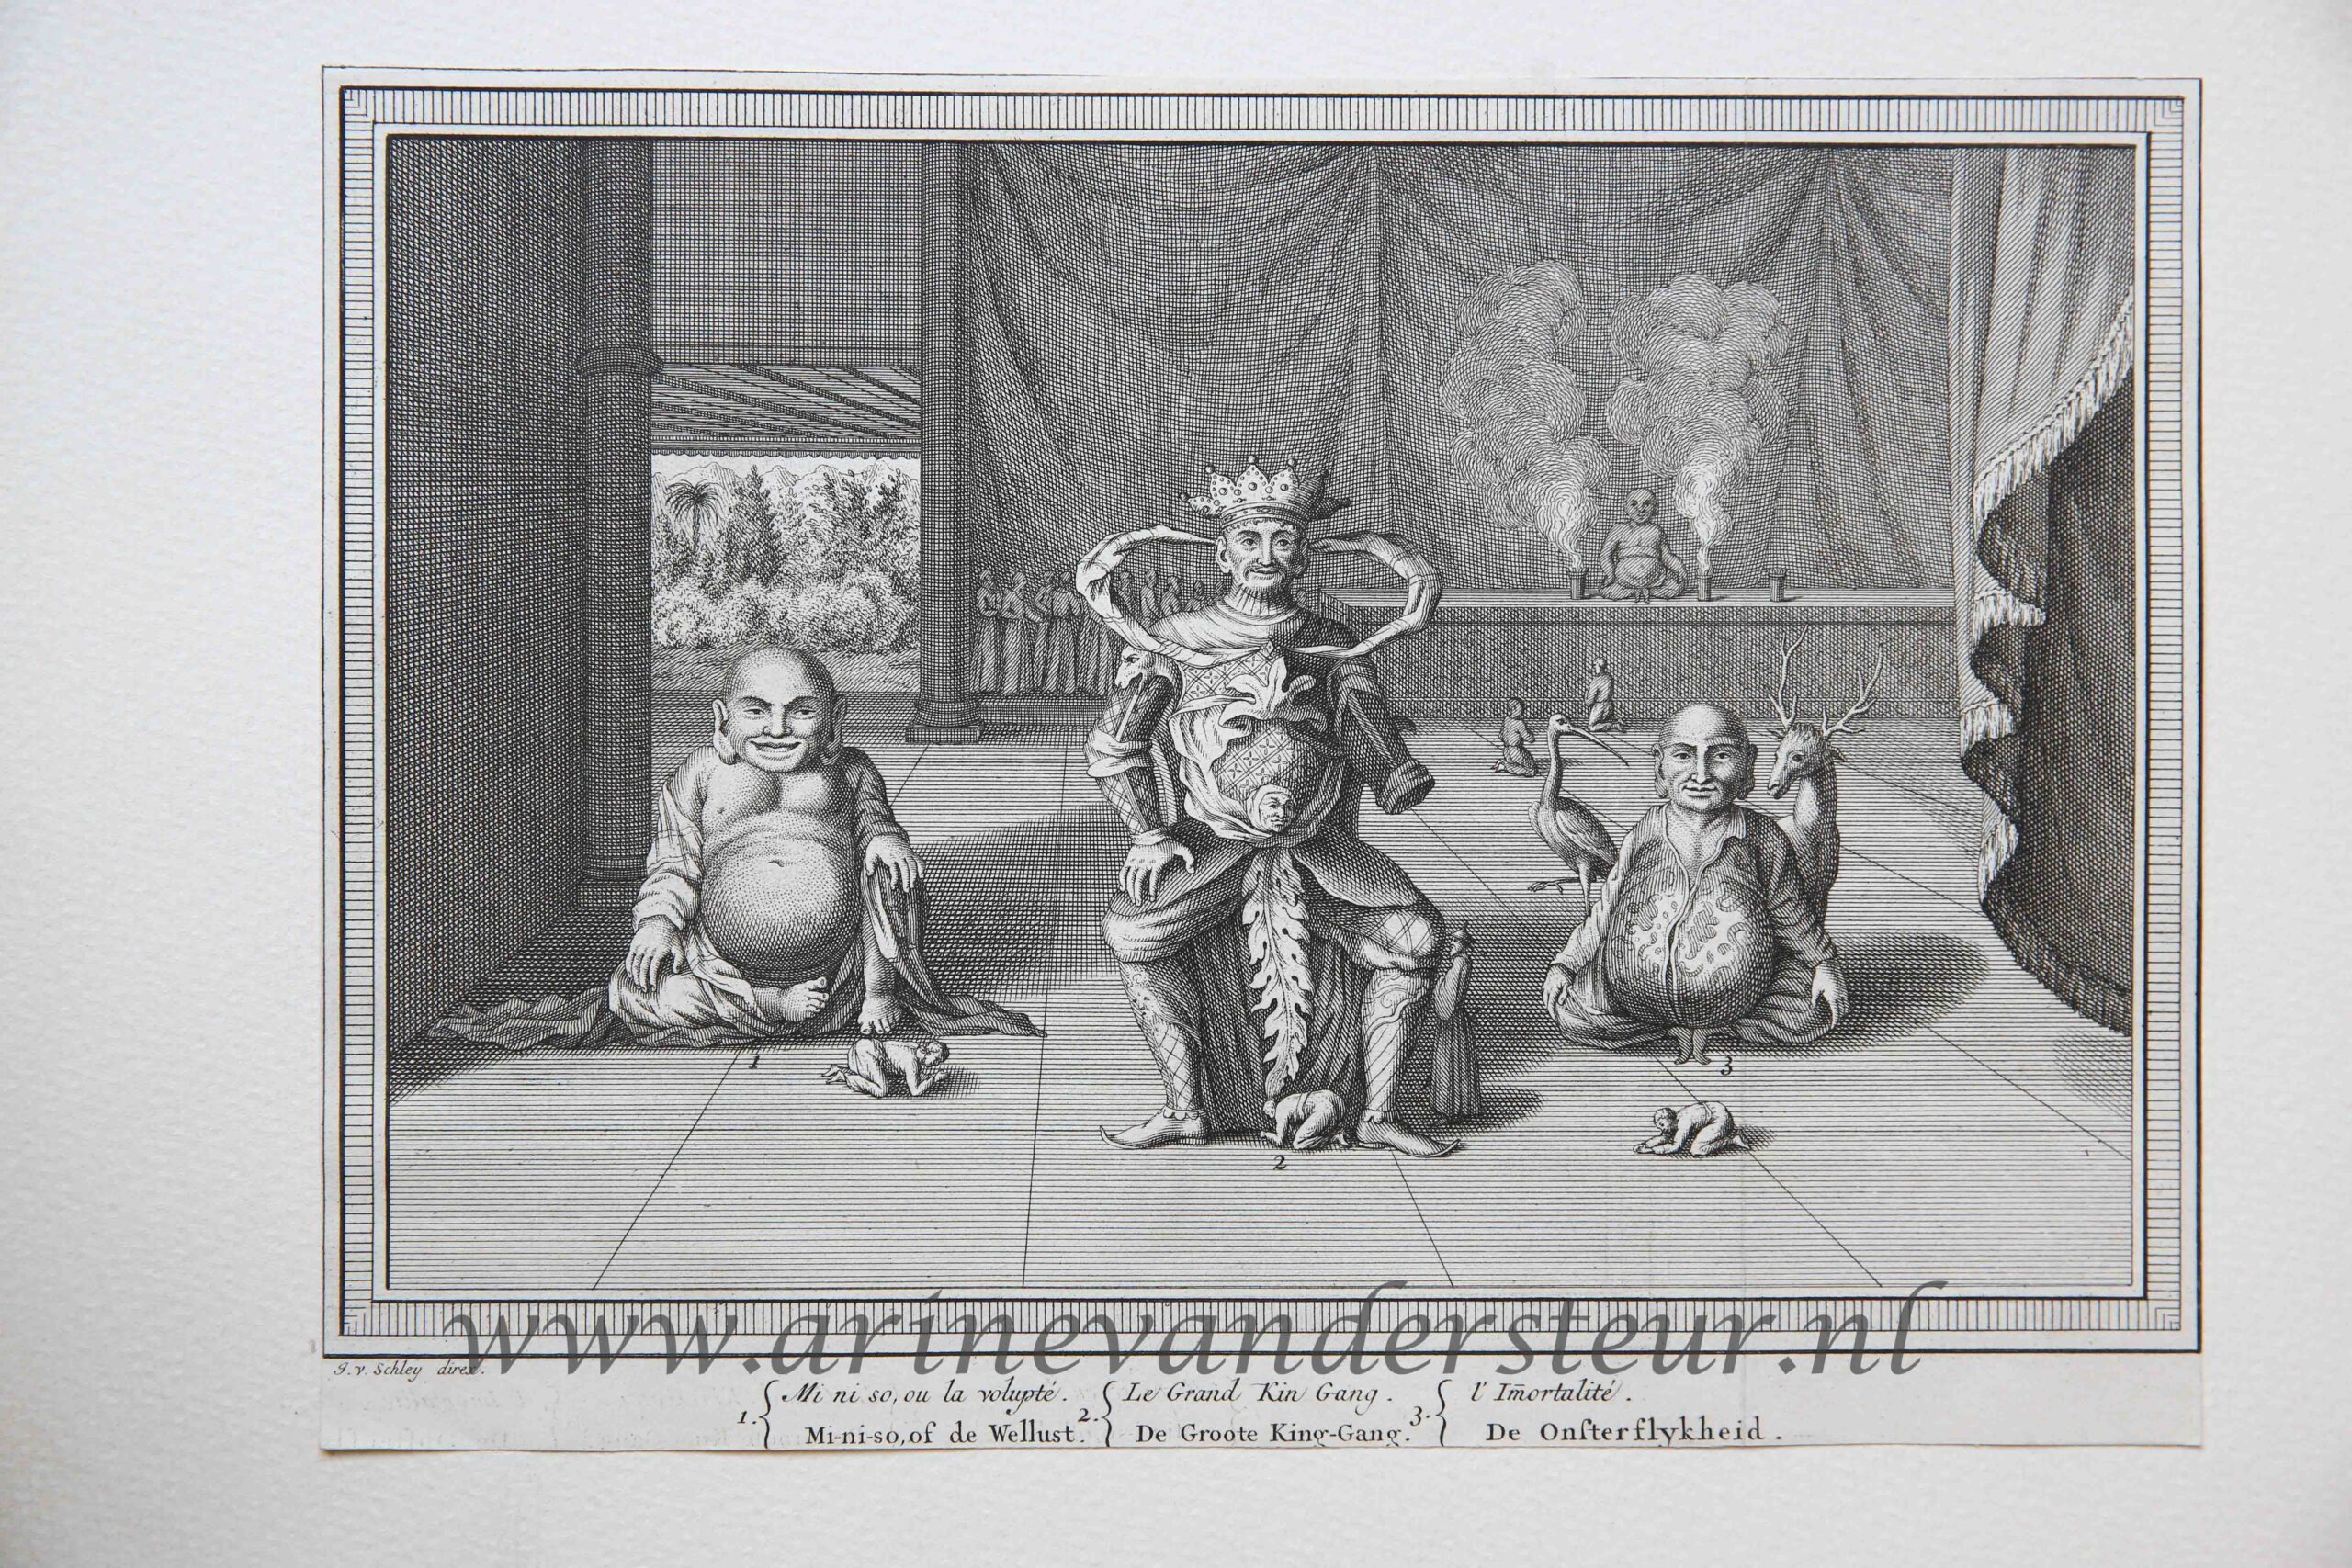 [Antique print, etching, China] PAGODES ET STATUES, published 1749.